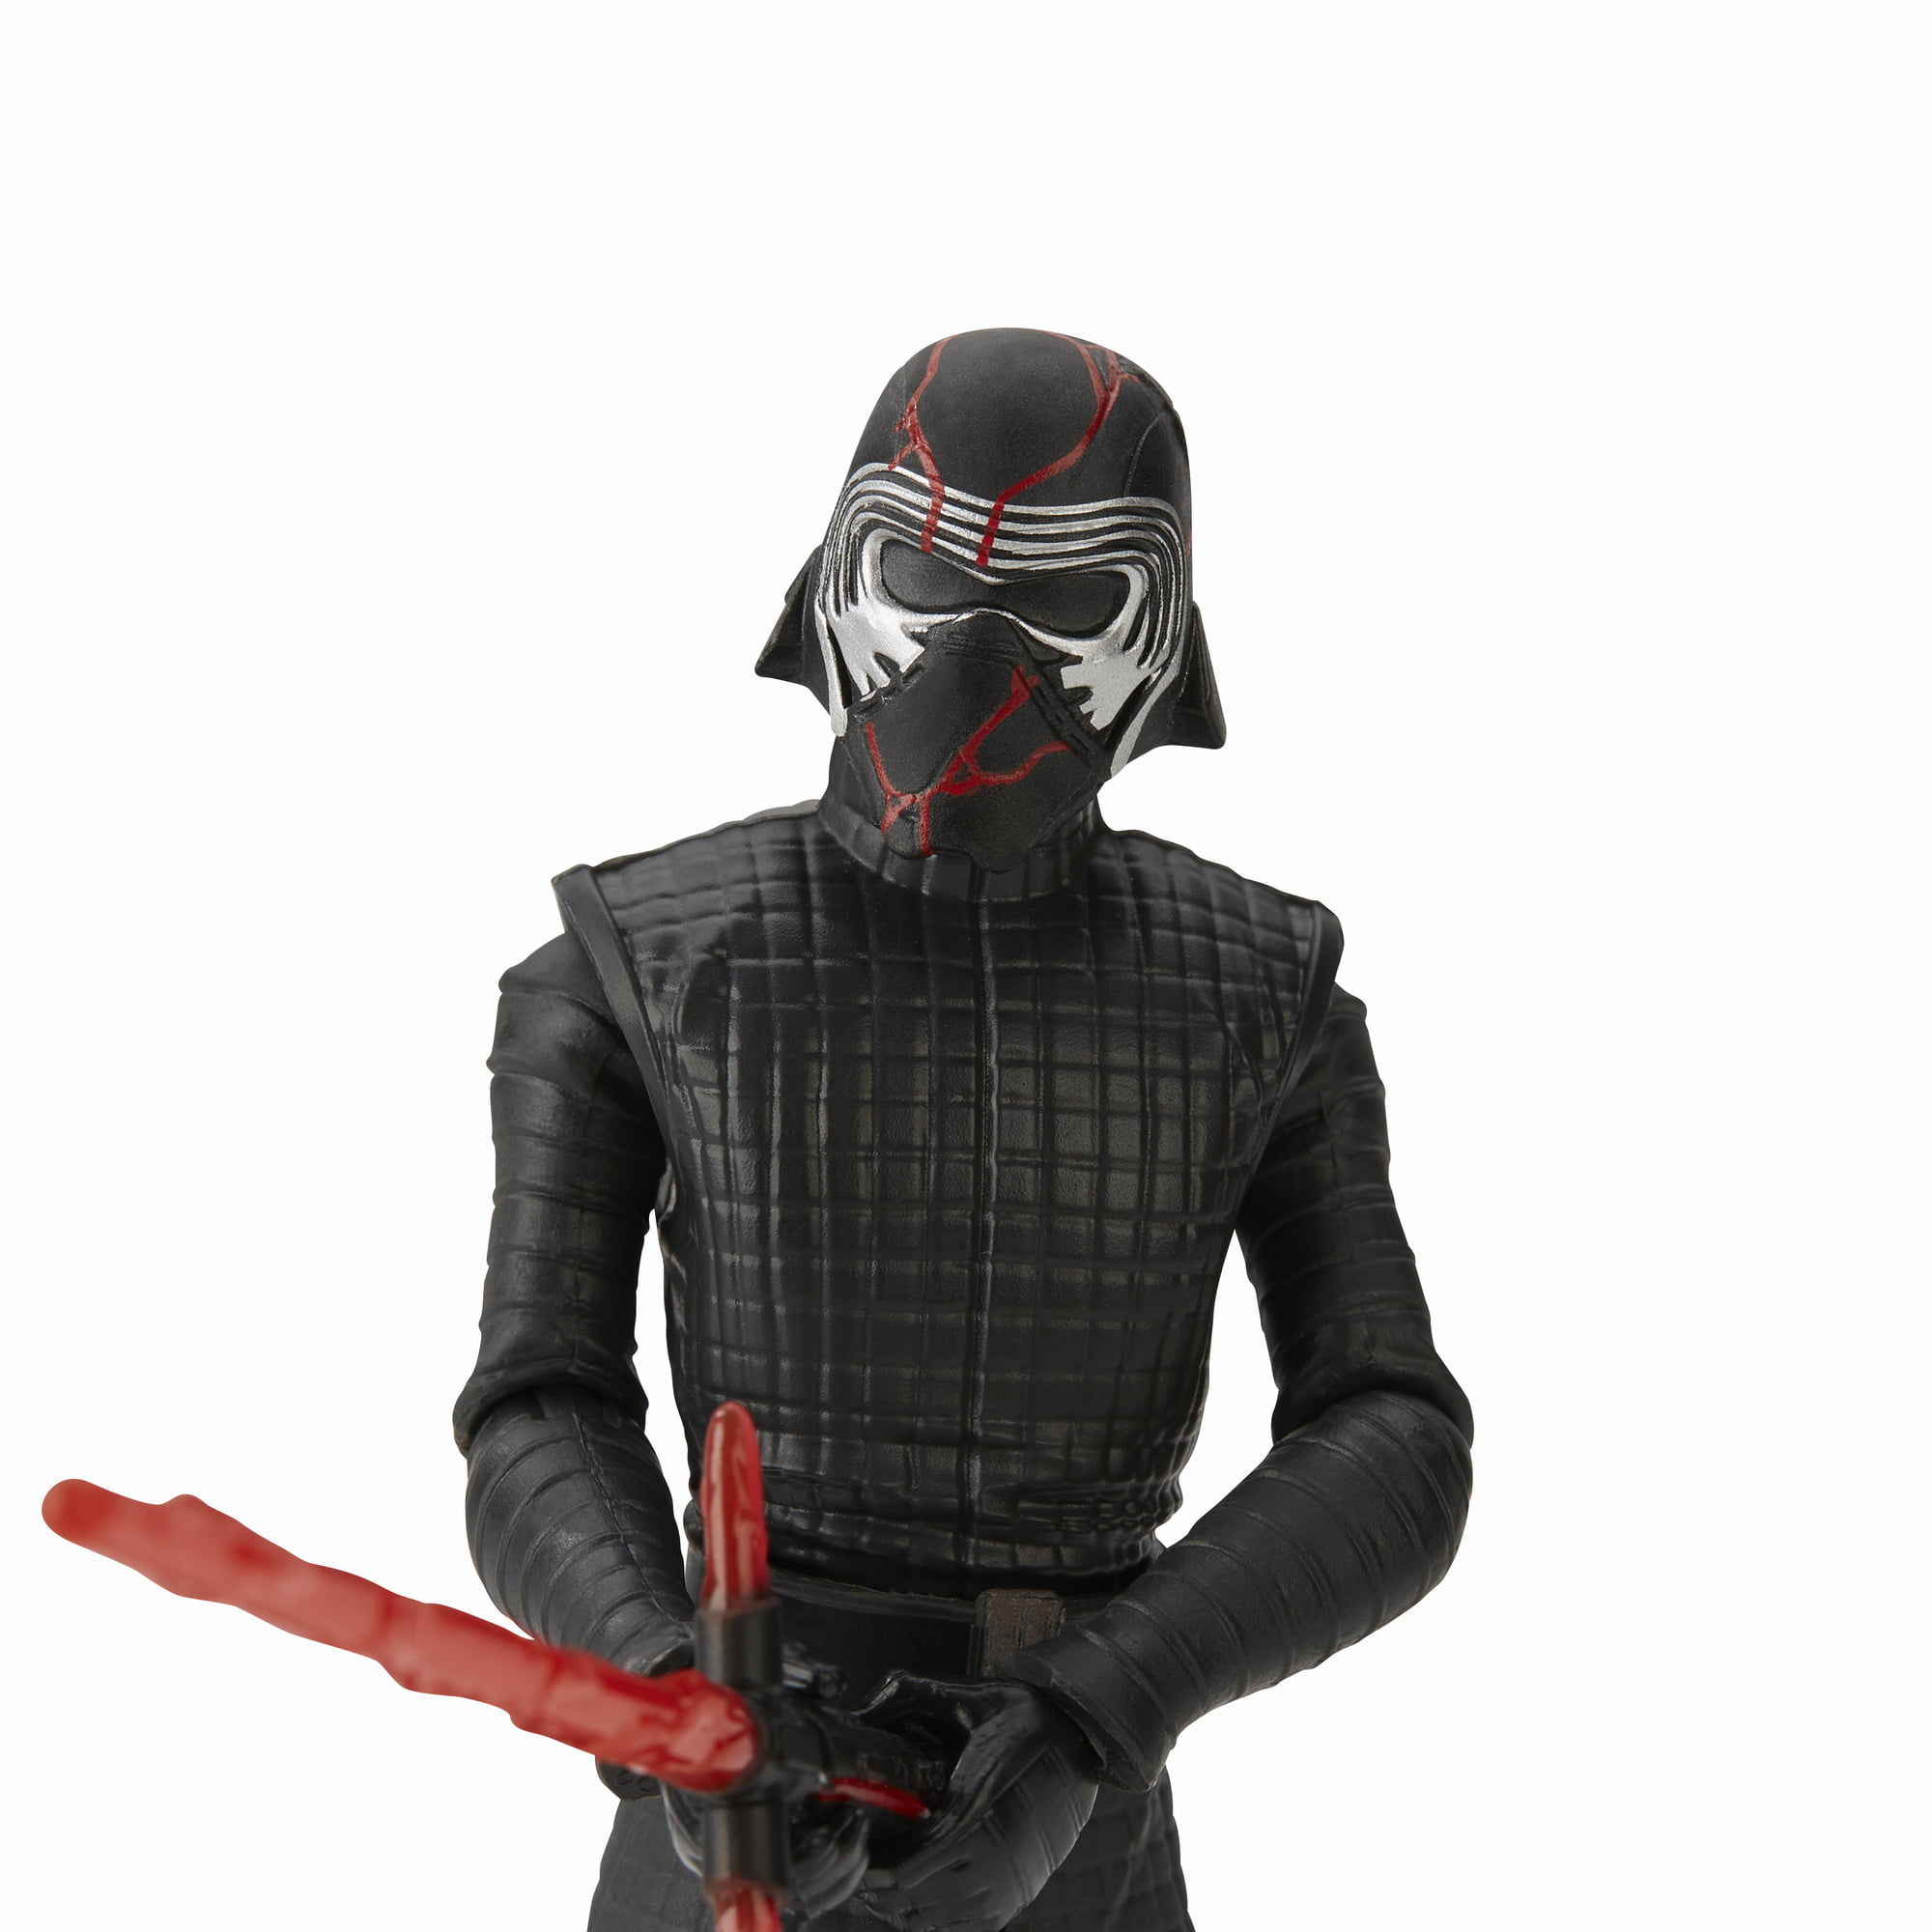 Star Wars Galaxy of Adventures Rise of The Skywalker Supreme Leader Kylo Ren 5-Scale Action Figure Toy with Fun Action Move